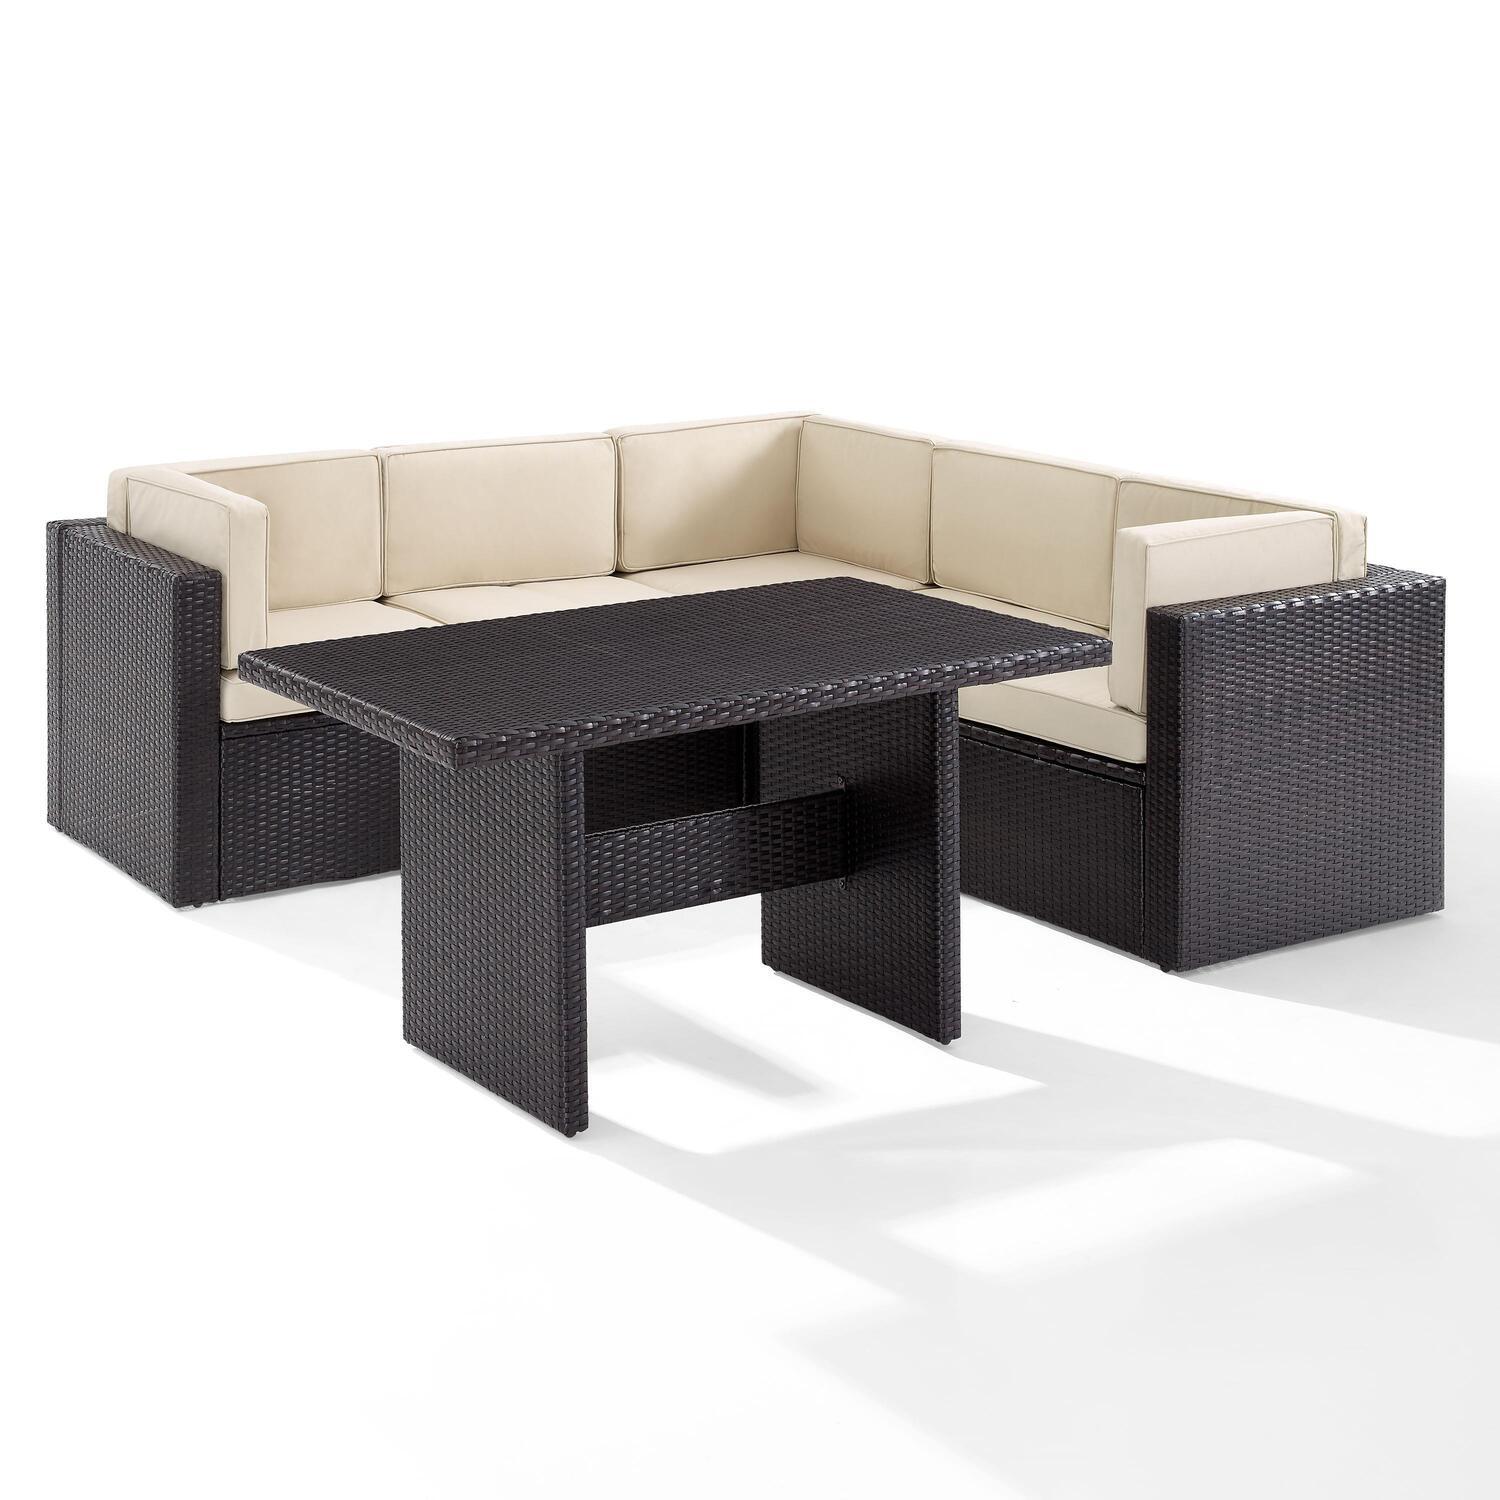 Crosley Palm Harbor 6Pc Outdoor Wicker Sectional Set- 3 Corner Chairs, 2 Center Chairs, Cocktail Table - image 1 of 10